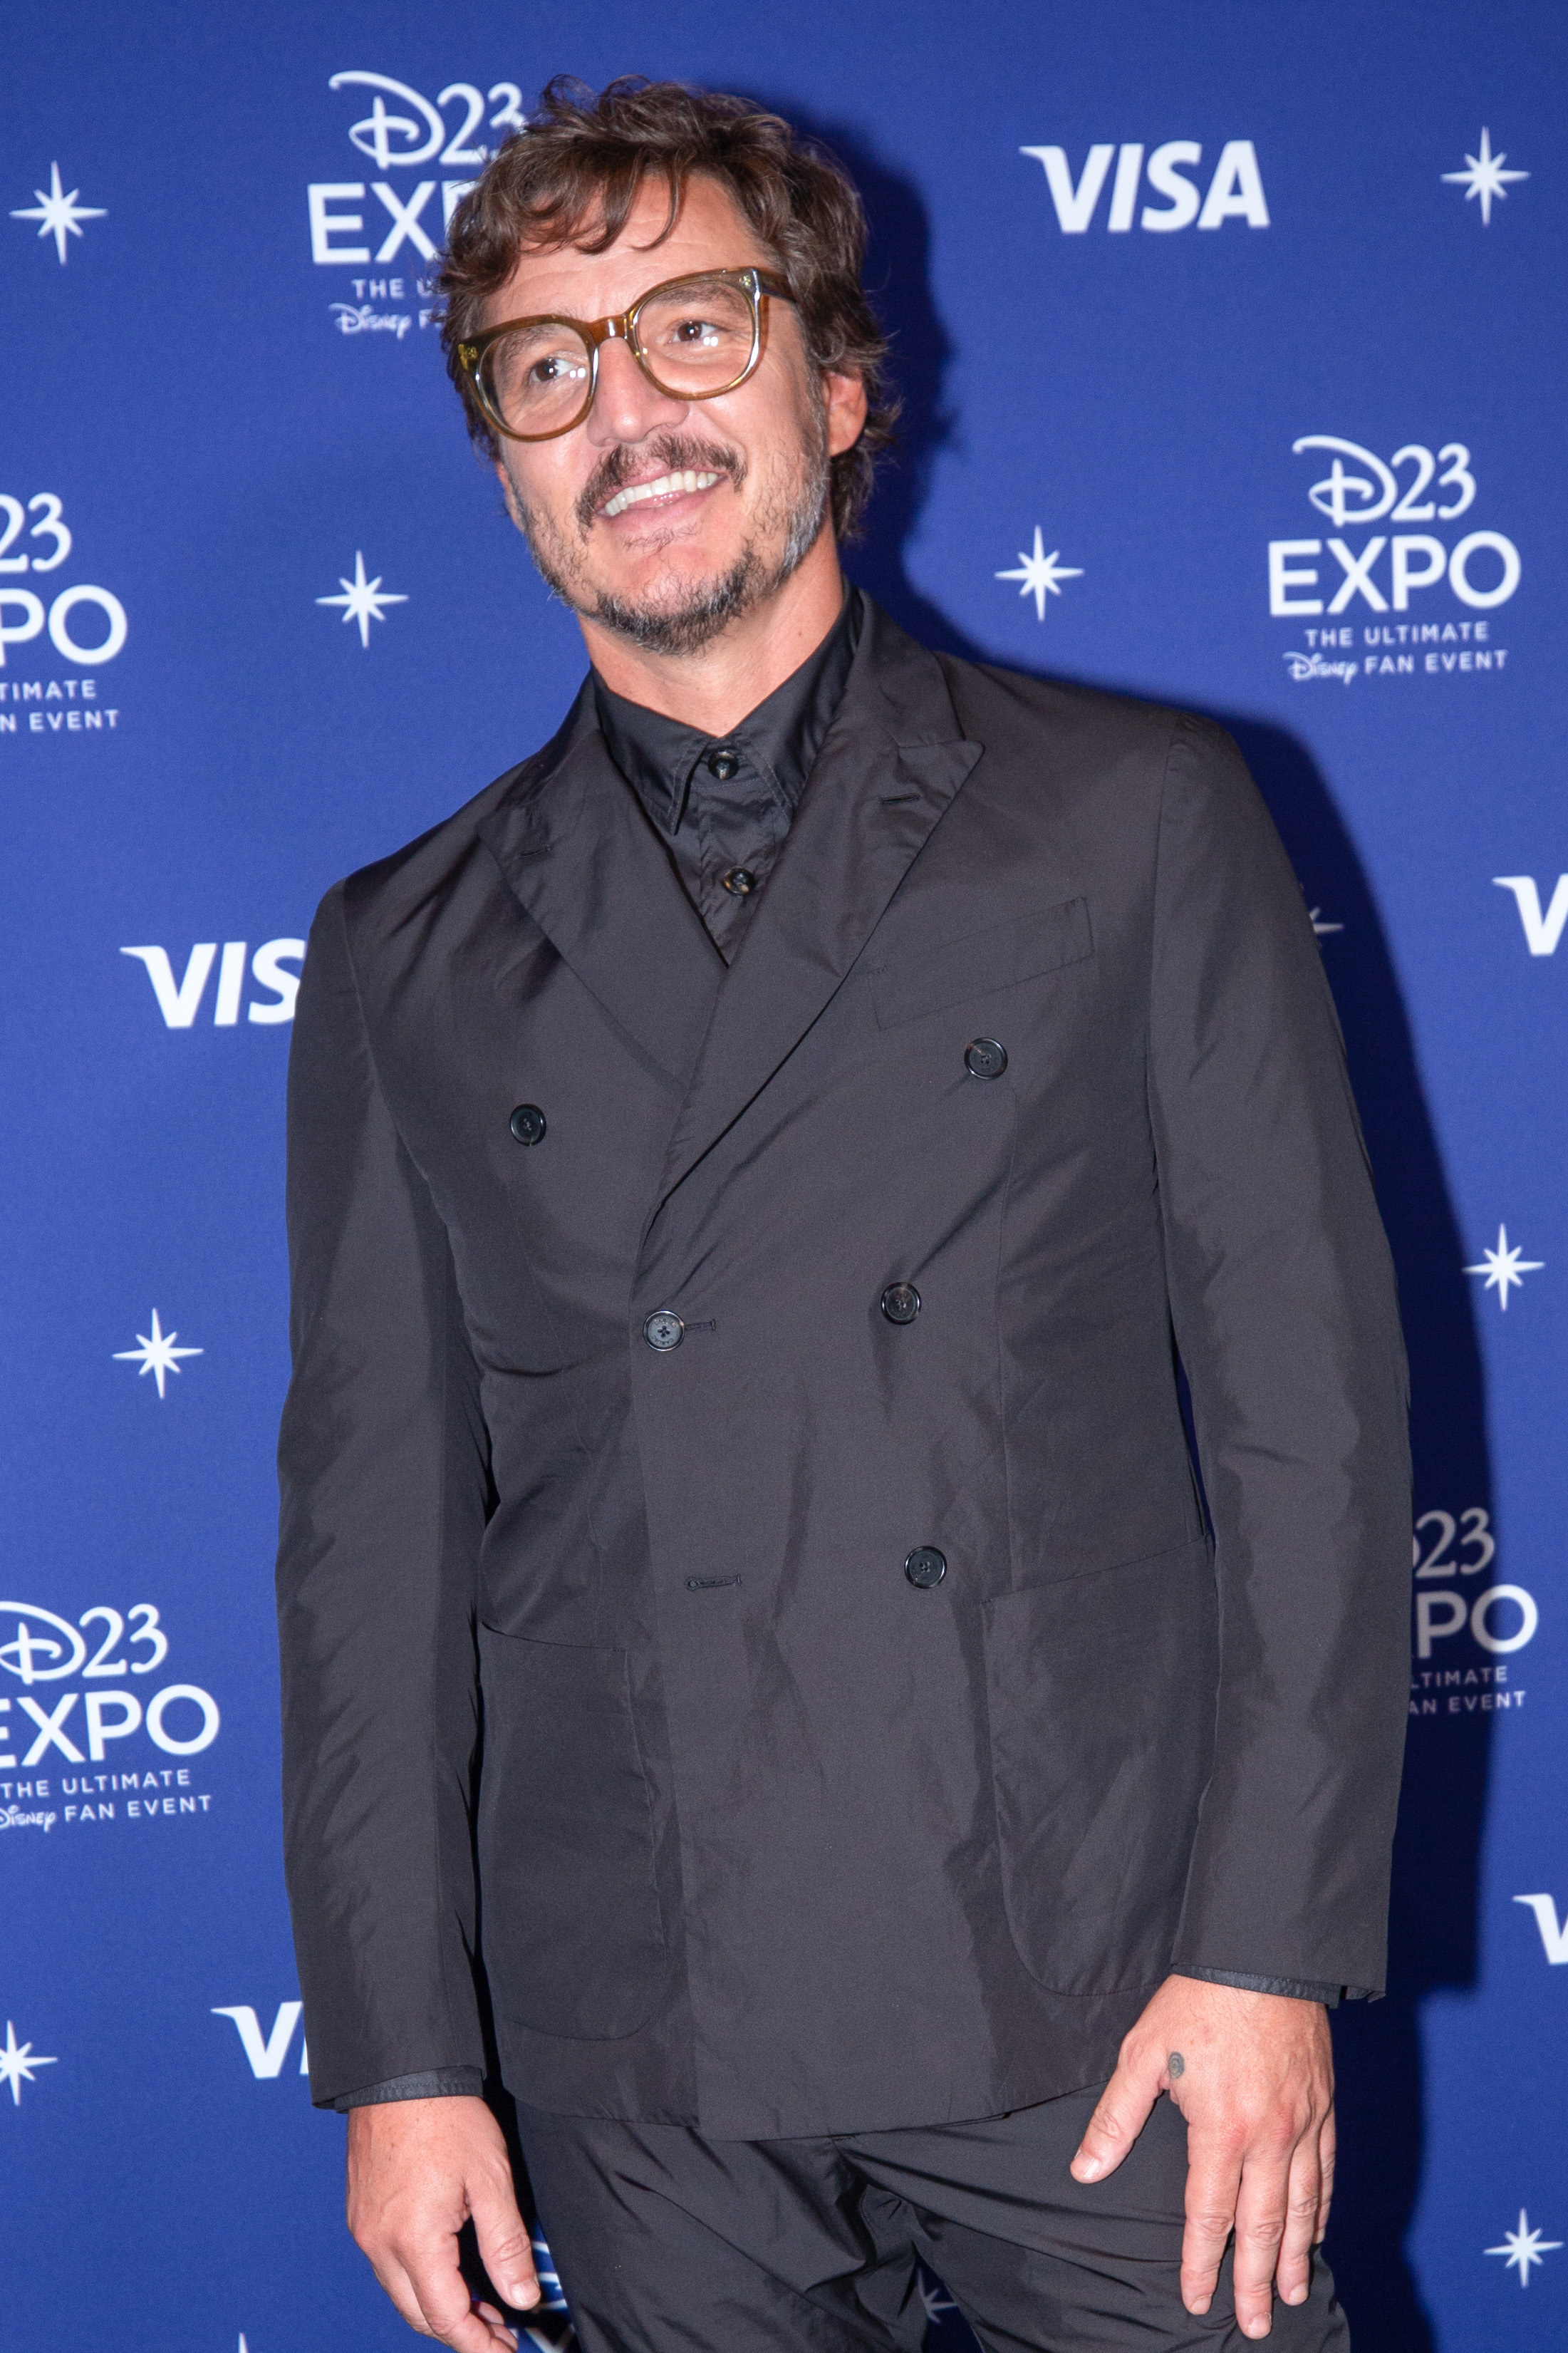 Pedro Pascal smiling on the red carpet